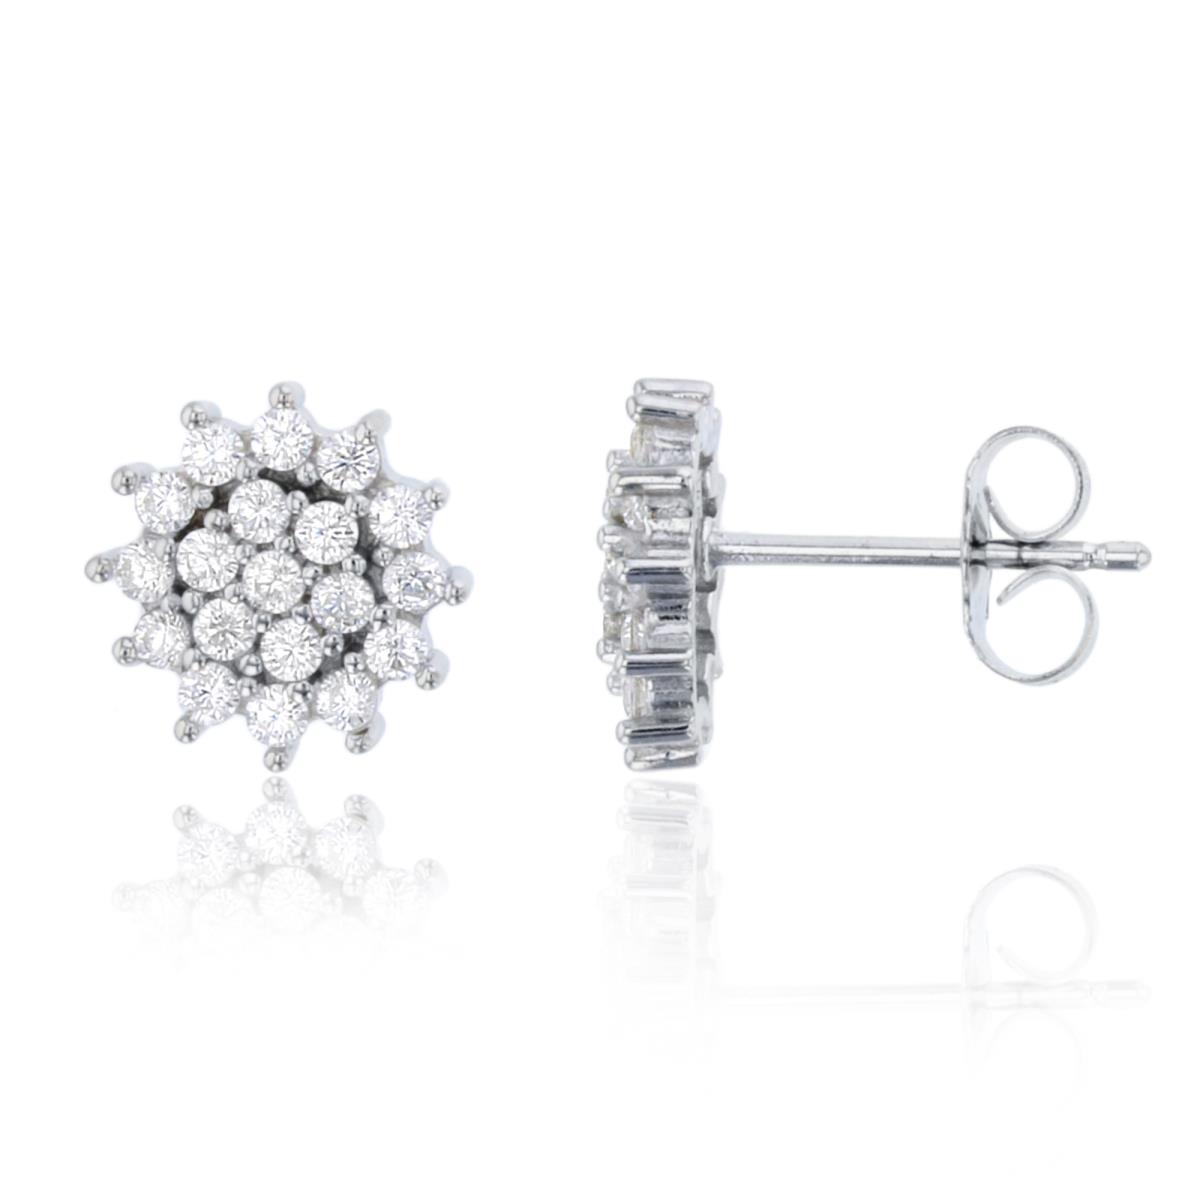 Sterling Silver 10mm Pave Cluster Stud Earring